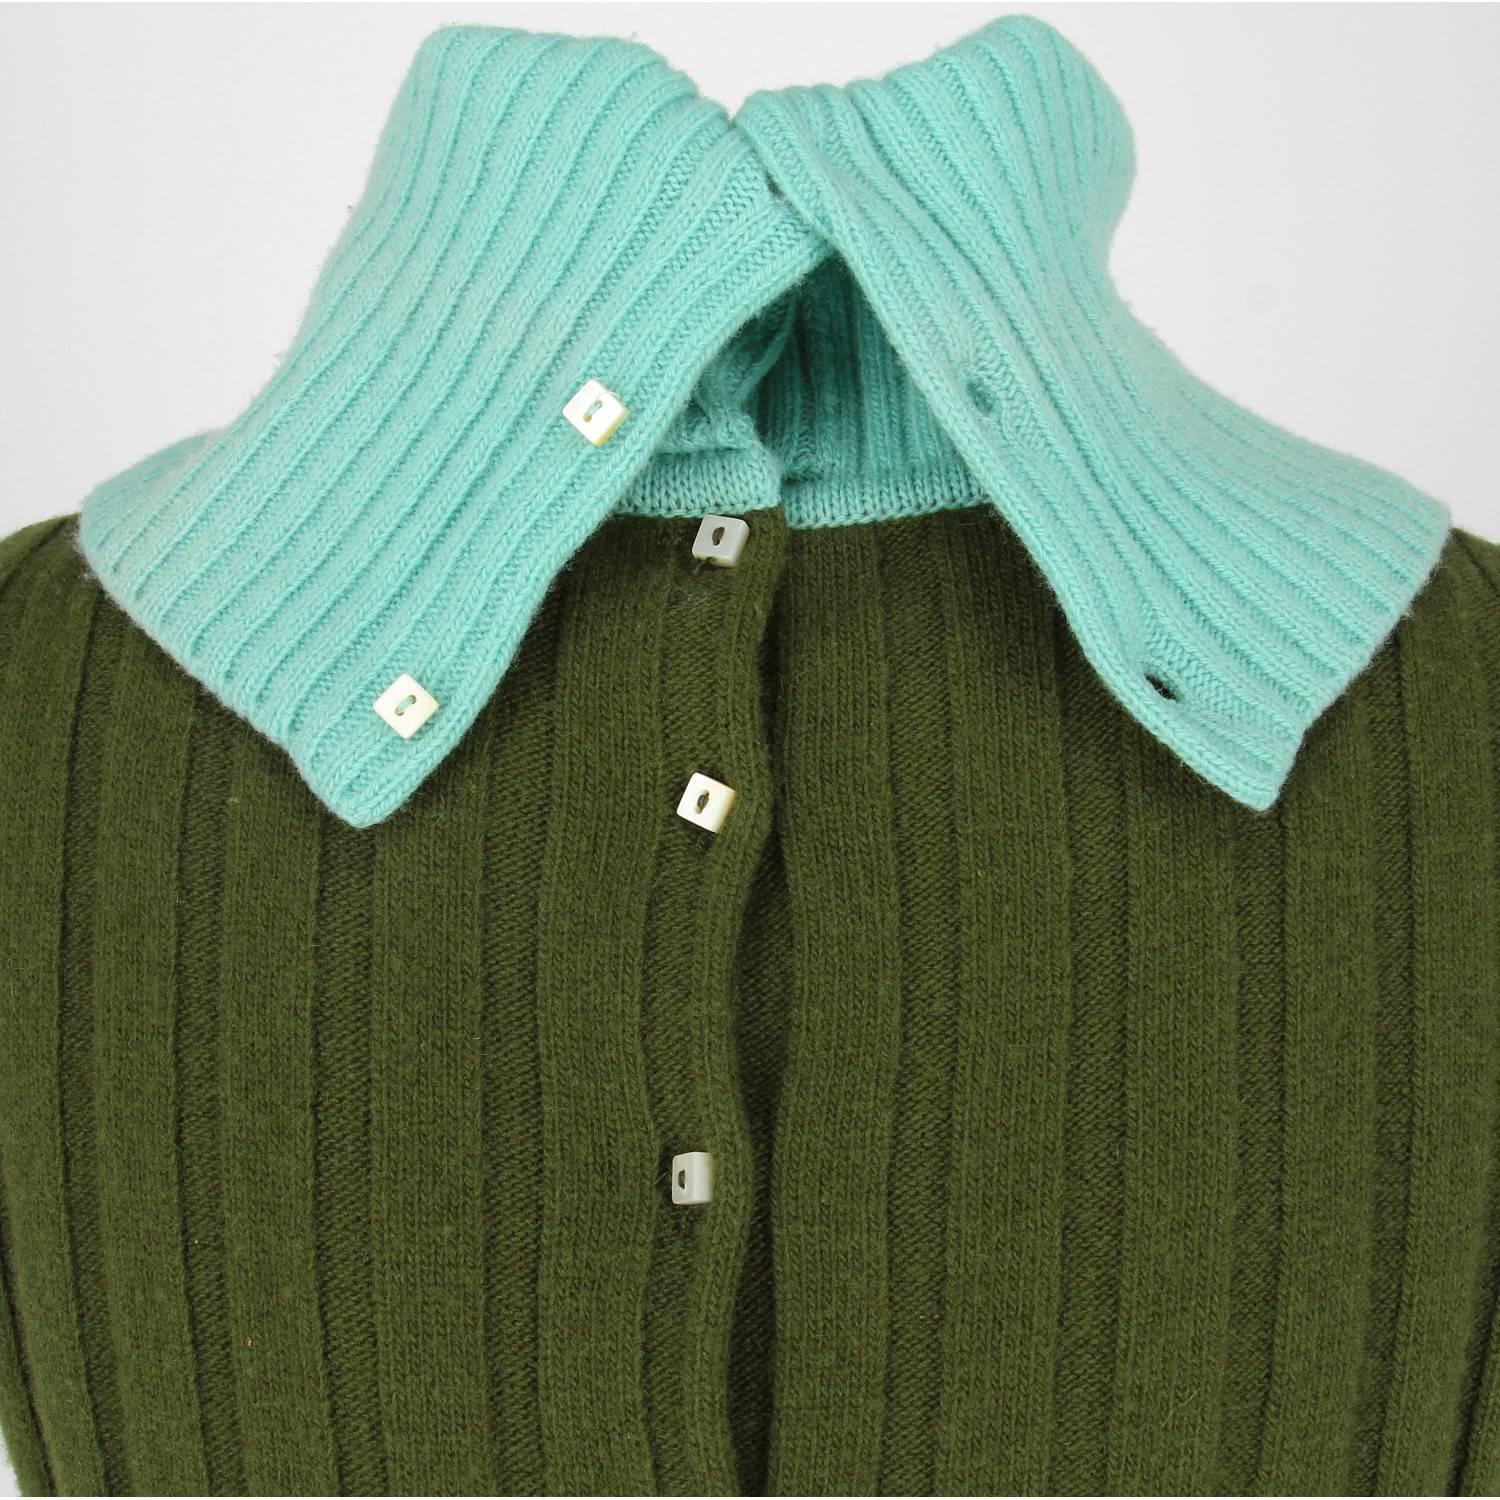 1990s Gianni Versace Green Knitted Vintage Top 1